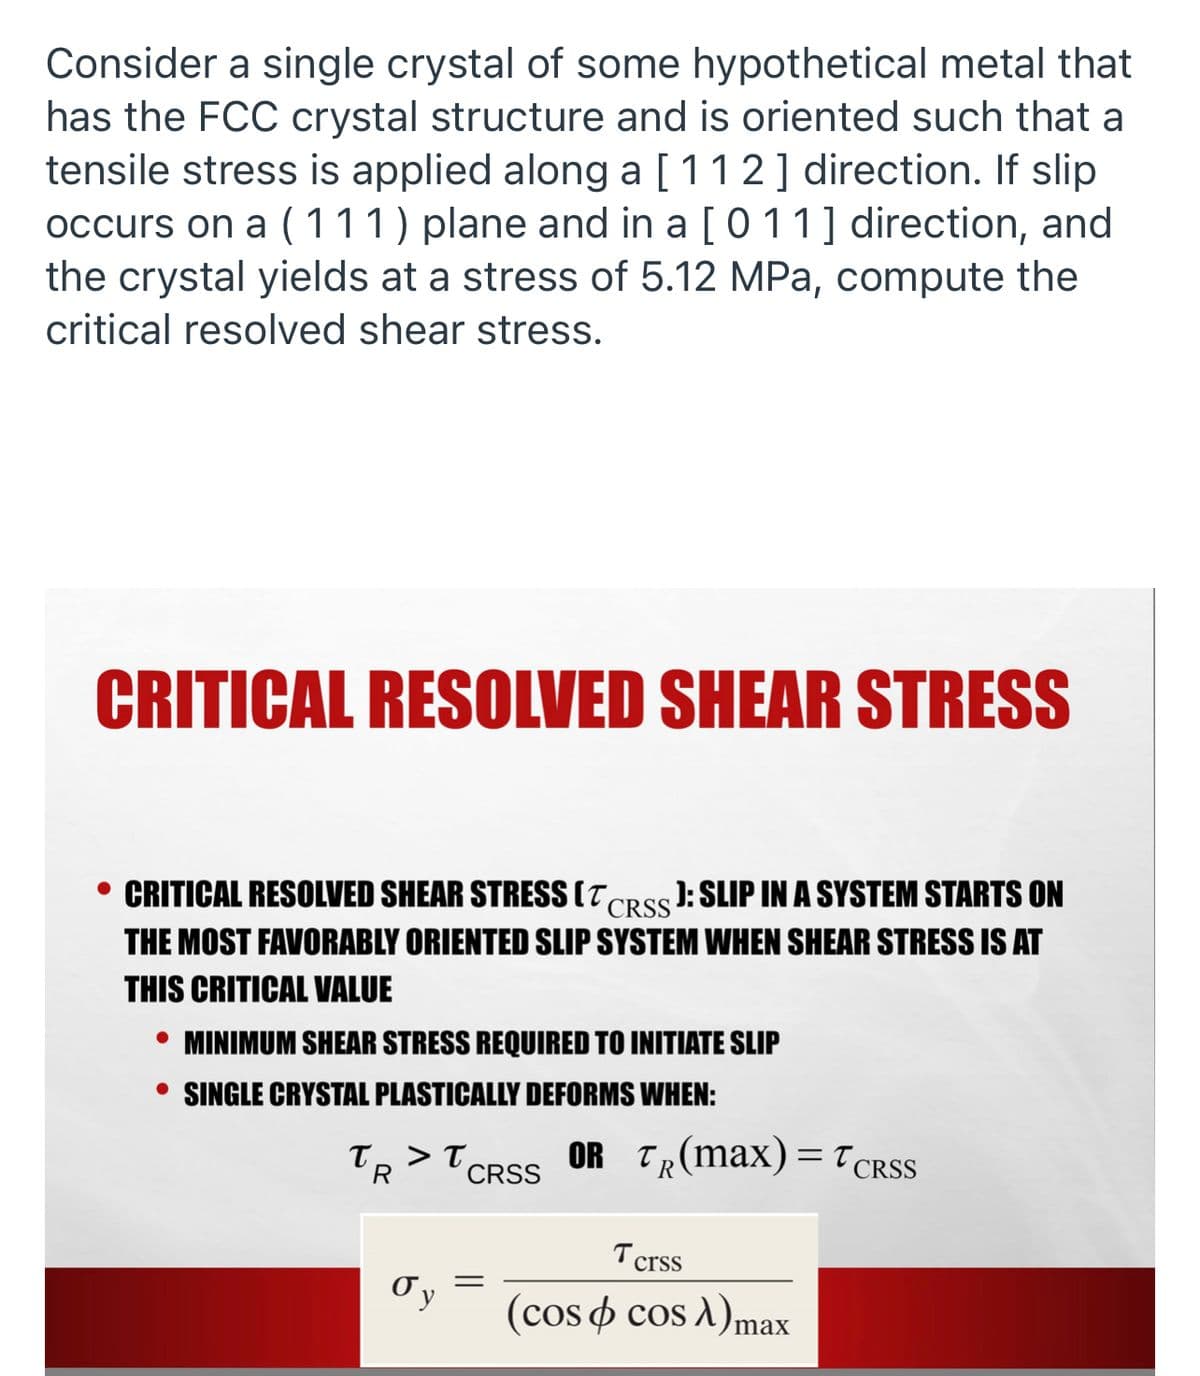 Consider a single crystal of some hypothetical metal that
has the FCC crystal structure and is oriented such that a
tensile stress is applied along a [11 2] direction. If slip
occurs on a ( 111) plane and in a [0 11] direction, and
the crystal yields at a stress of 5.12 MPa, compute the
critical resolved shear stress.
CRITICAL RESOLVED SHEAR STRESS
• CRITICAL RESOLVED SHEAR STRESS (T,
THE MOST FAVORABLY ORIENTED SLIP SYSTEM WHEN SHEAR STRESS IS AT
J: SLIP IN A SYSTEM STARTS ON
CRSS
THIS CRITICAL VALUE
• MINIMUM SHEAR STRESS REQUIRED TO INITIATE SLIP
• SINGLE CRYSTAL PLASTICALLY DEFORMS WHEN:
T, > T,
CRSS
OR TR(max) =T CRSS
'R
Tcrss
(cos o cos A)max
